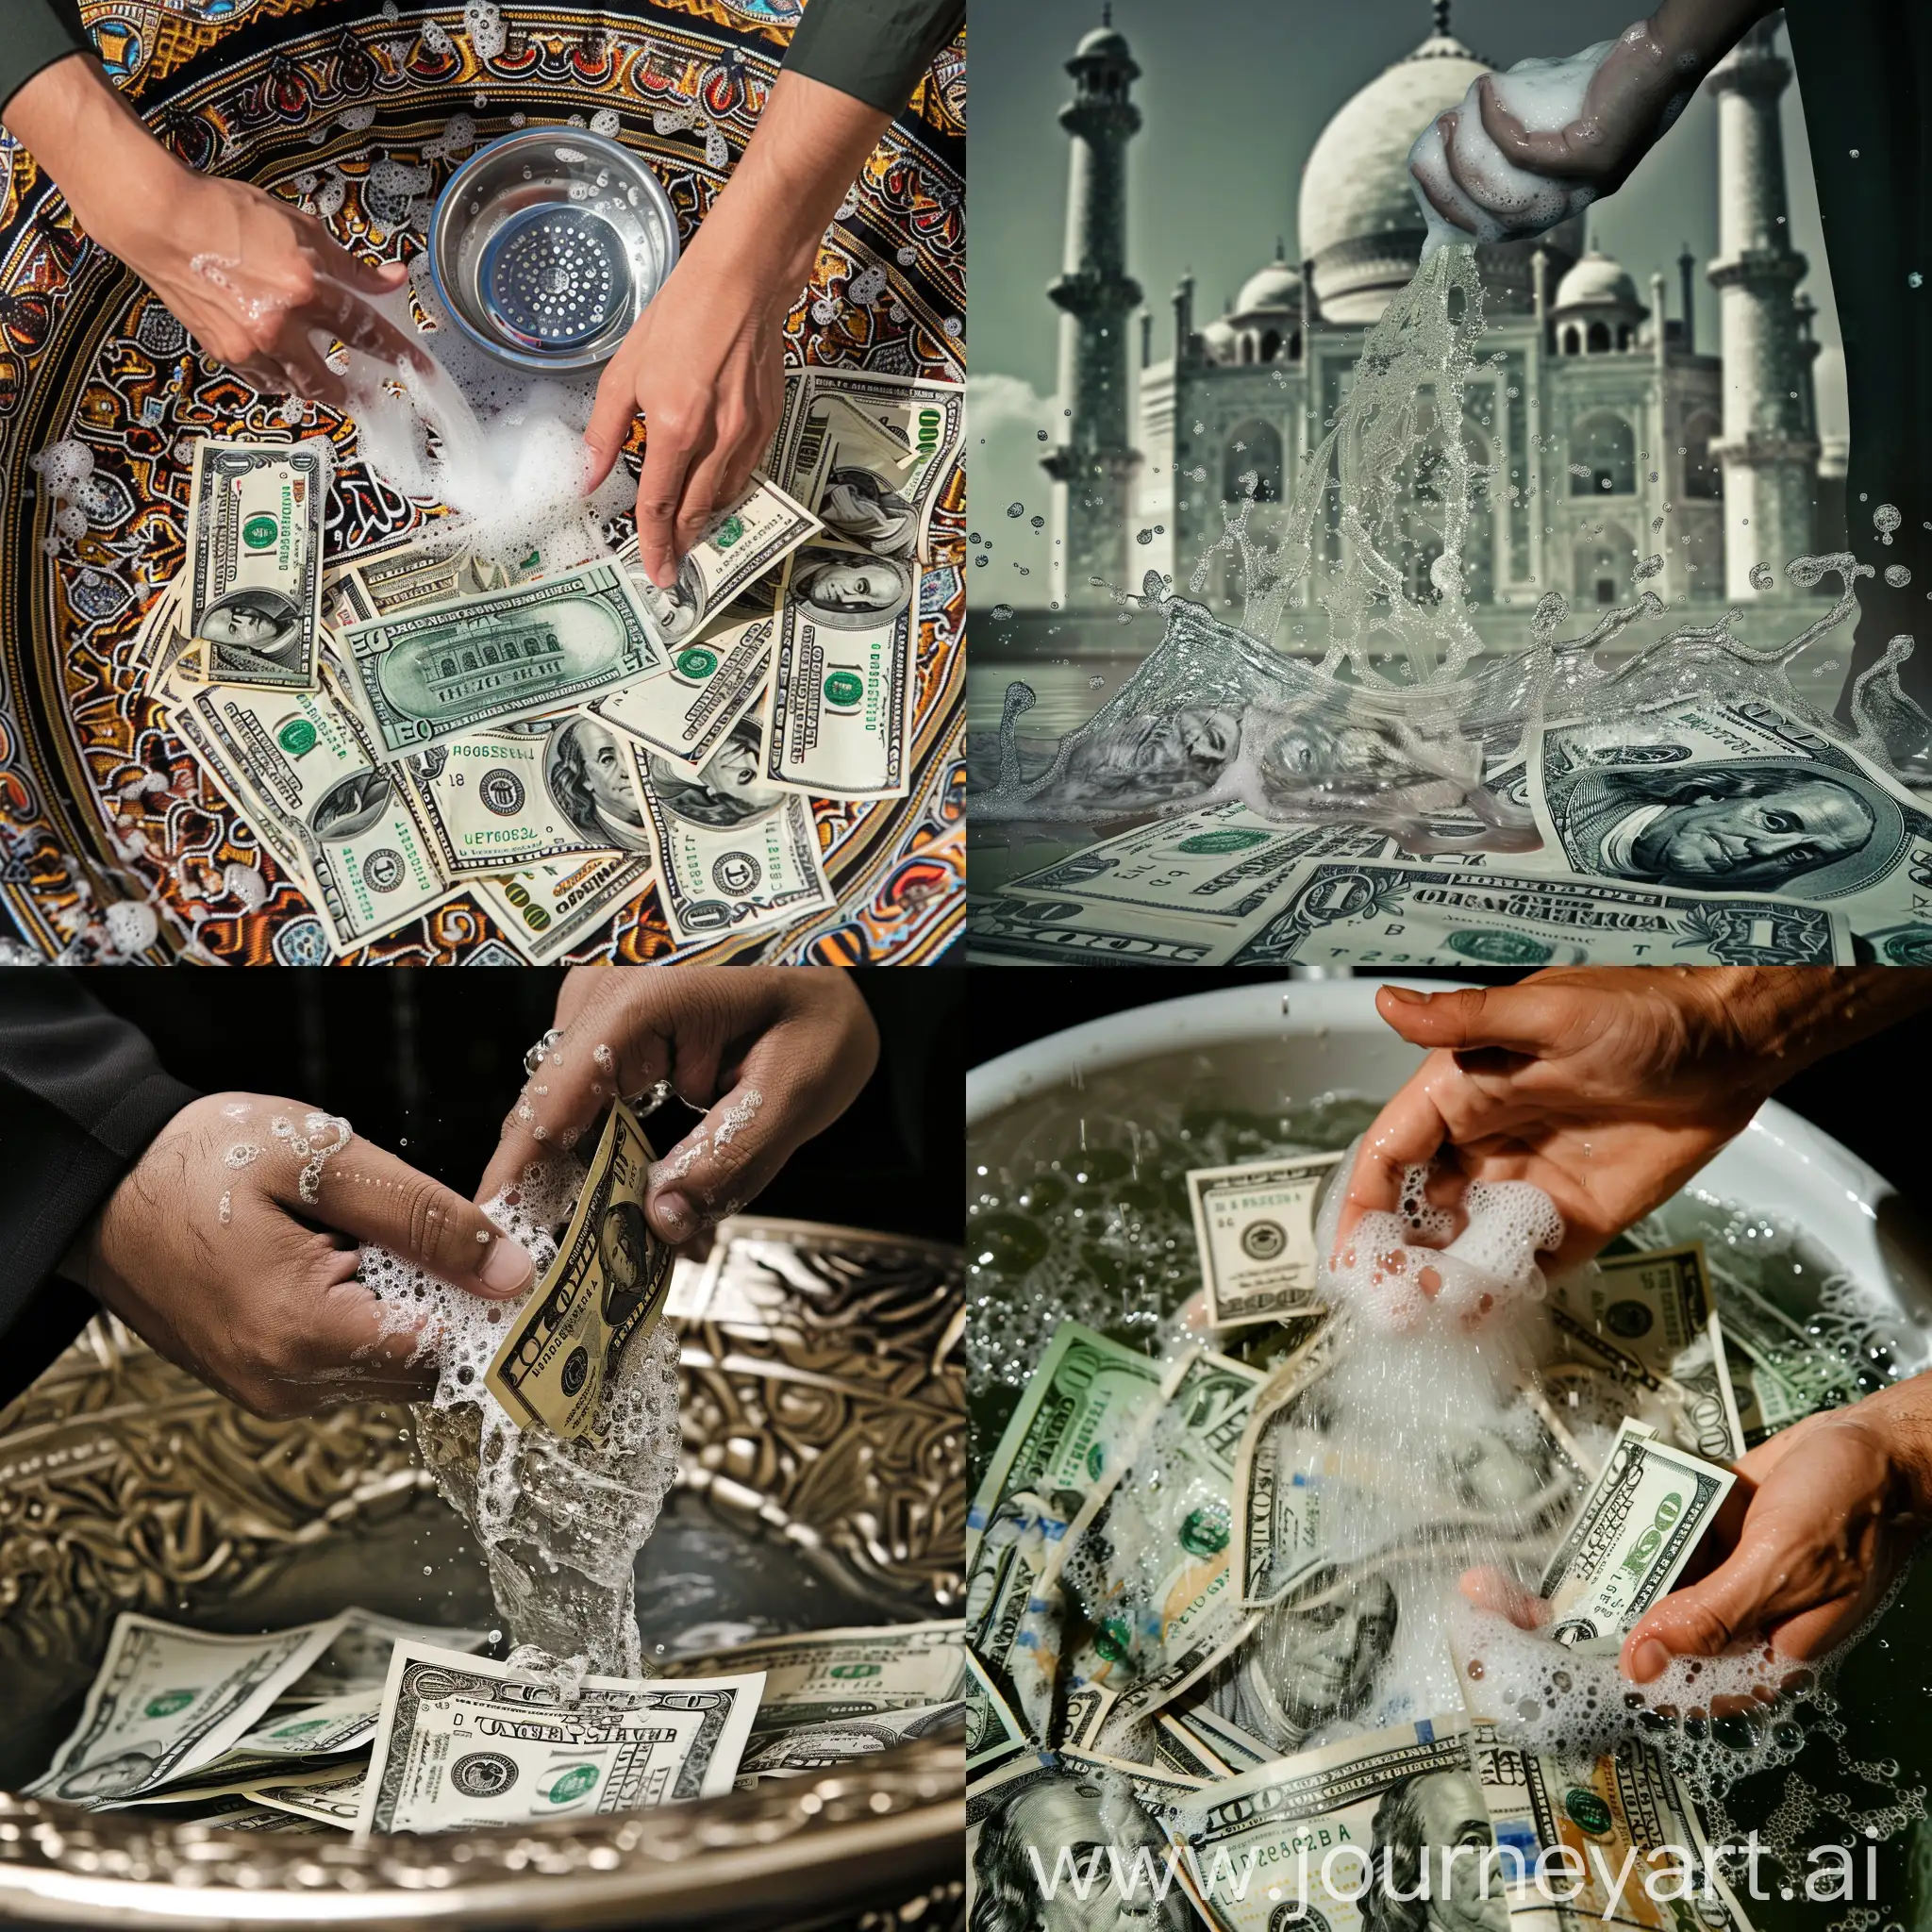 A photo of a person washing dollars with the Grand Imam Zaman